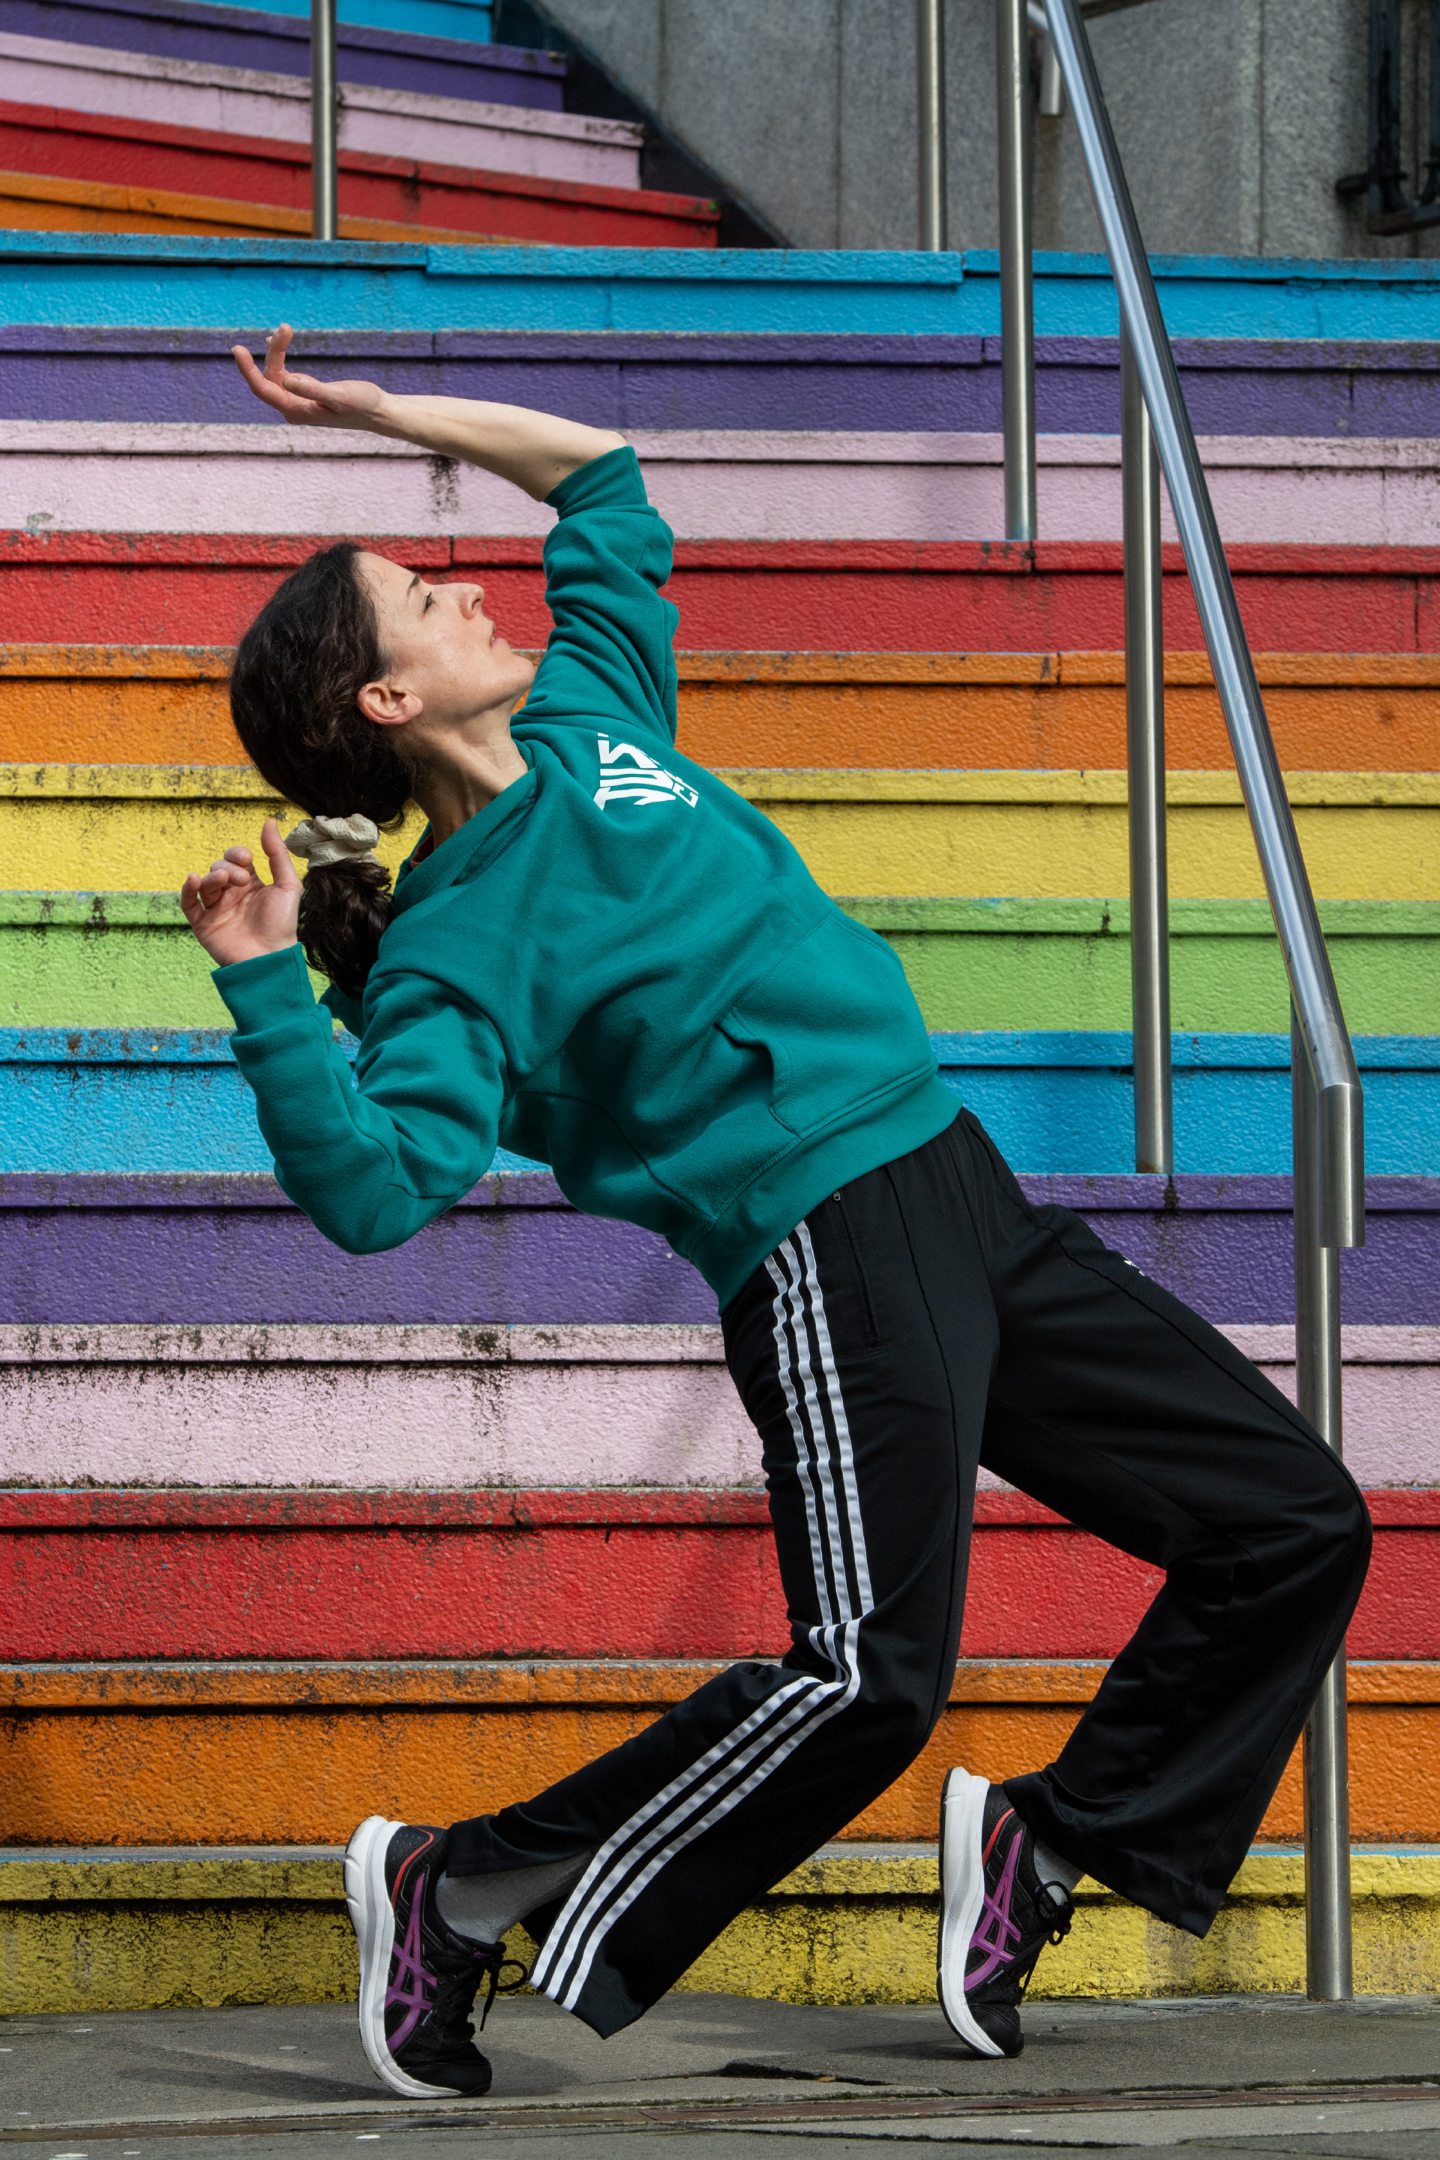 Sofia Kondylia, who runs adult dance classes in Aberdeen, does a dance move on some coloured outdoor stairs